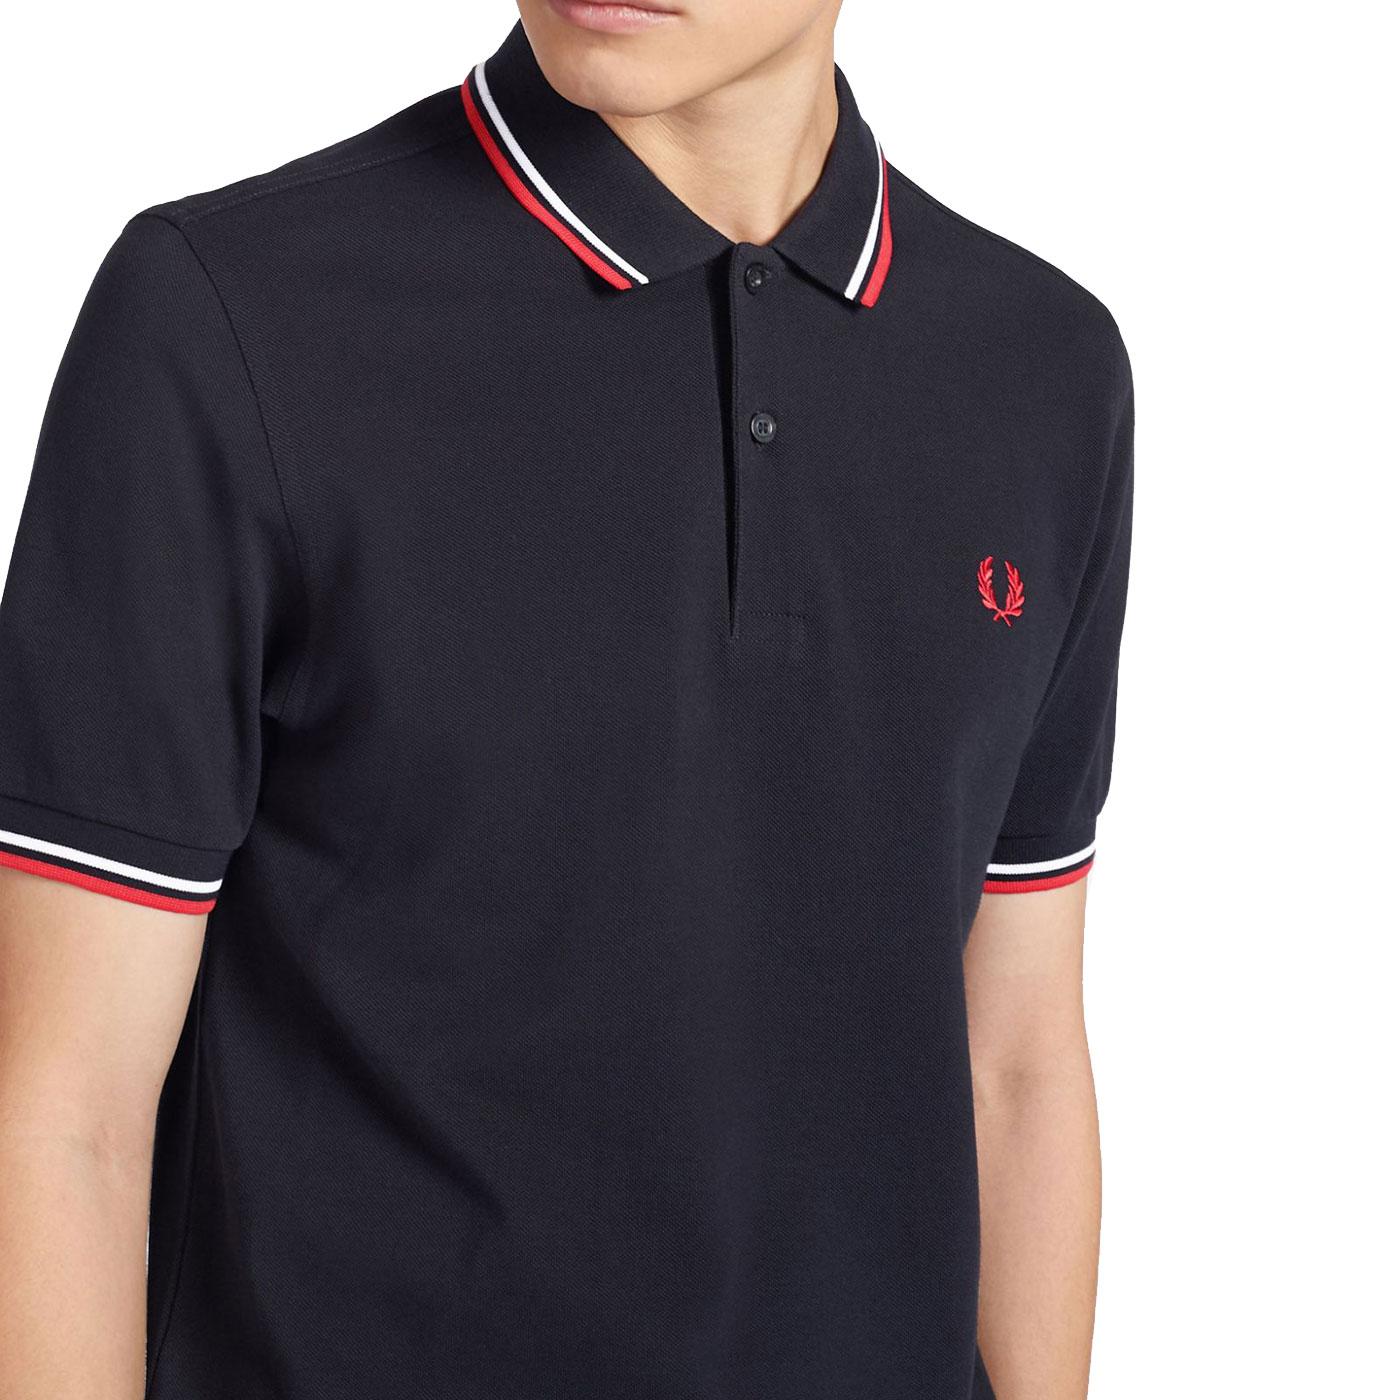 FRED PERRY Mens Twin Tipped Polo Shirt in Navy/Red/White